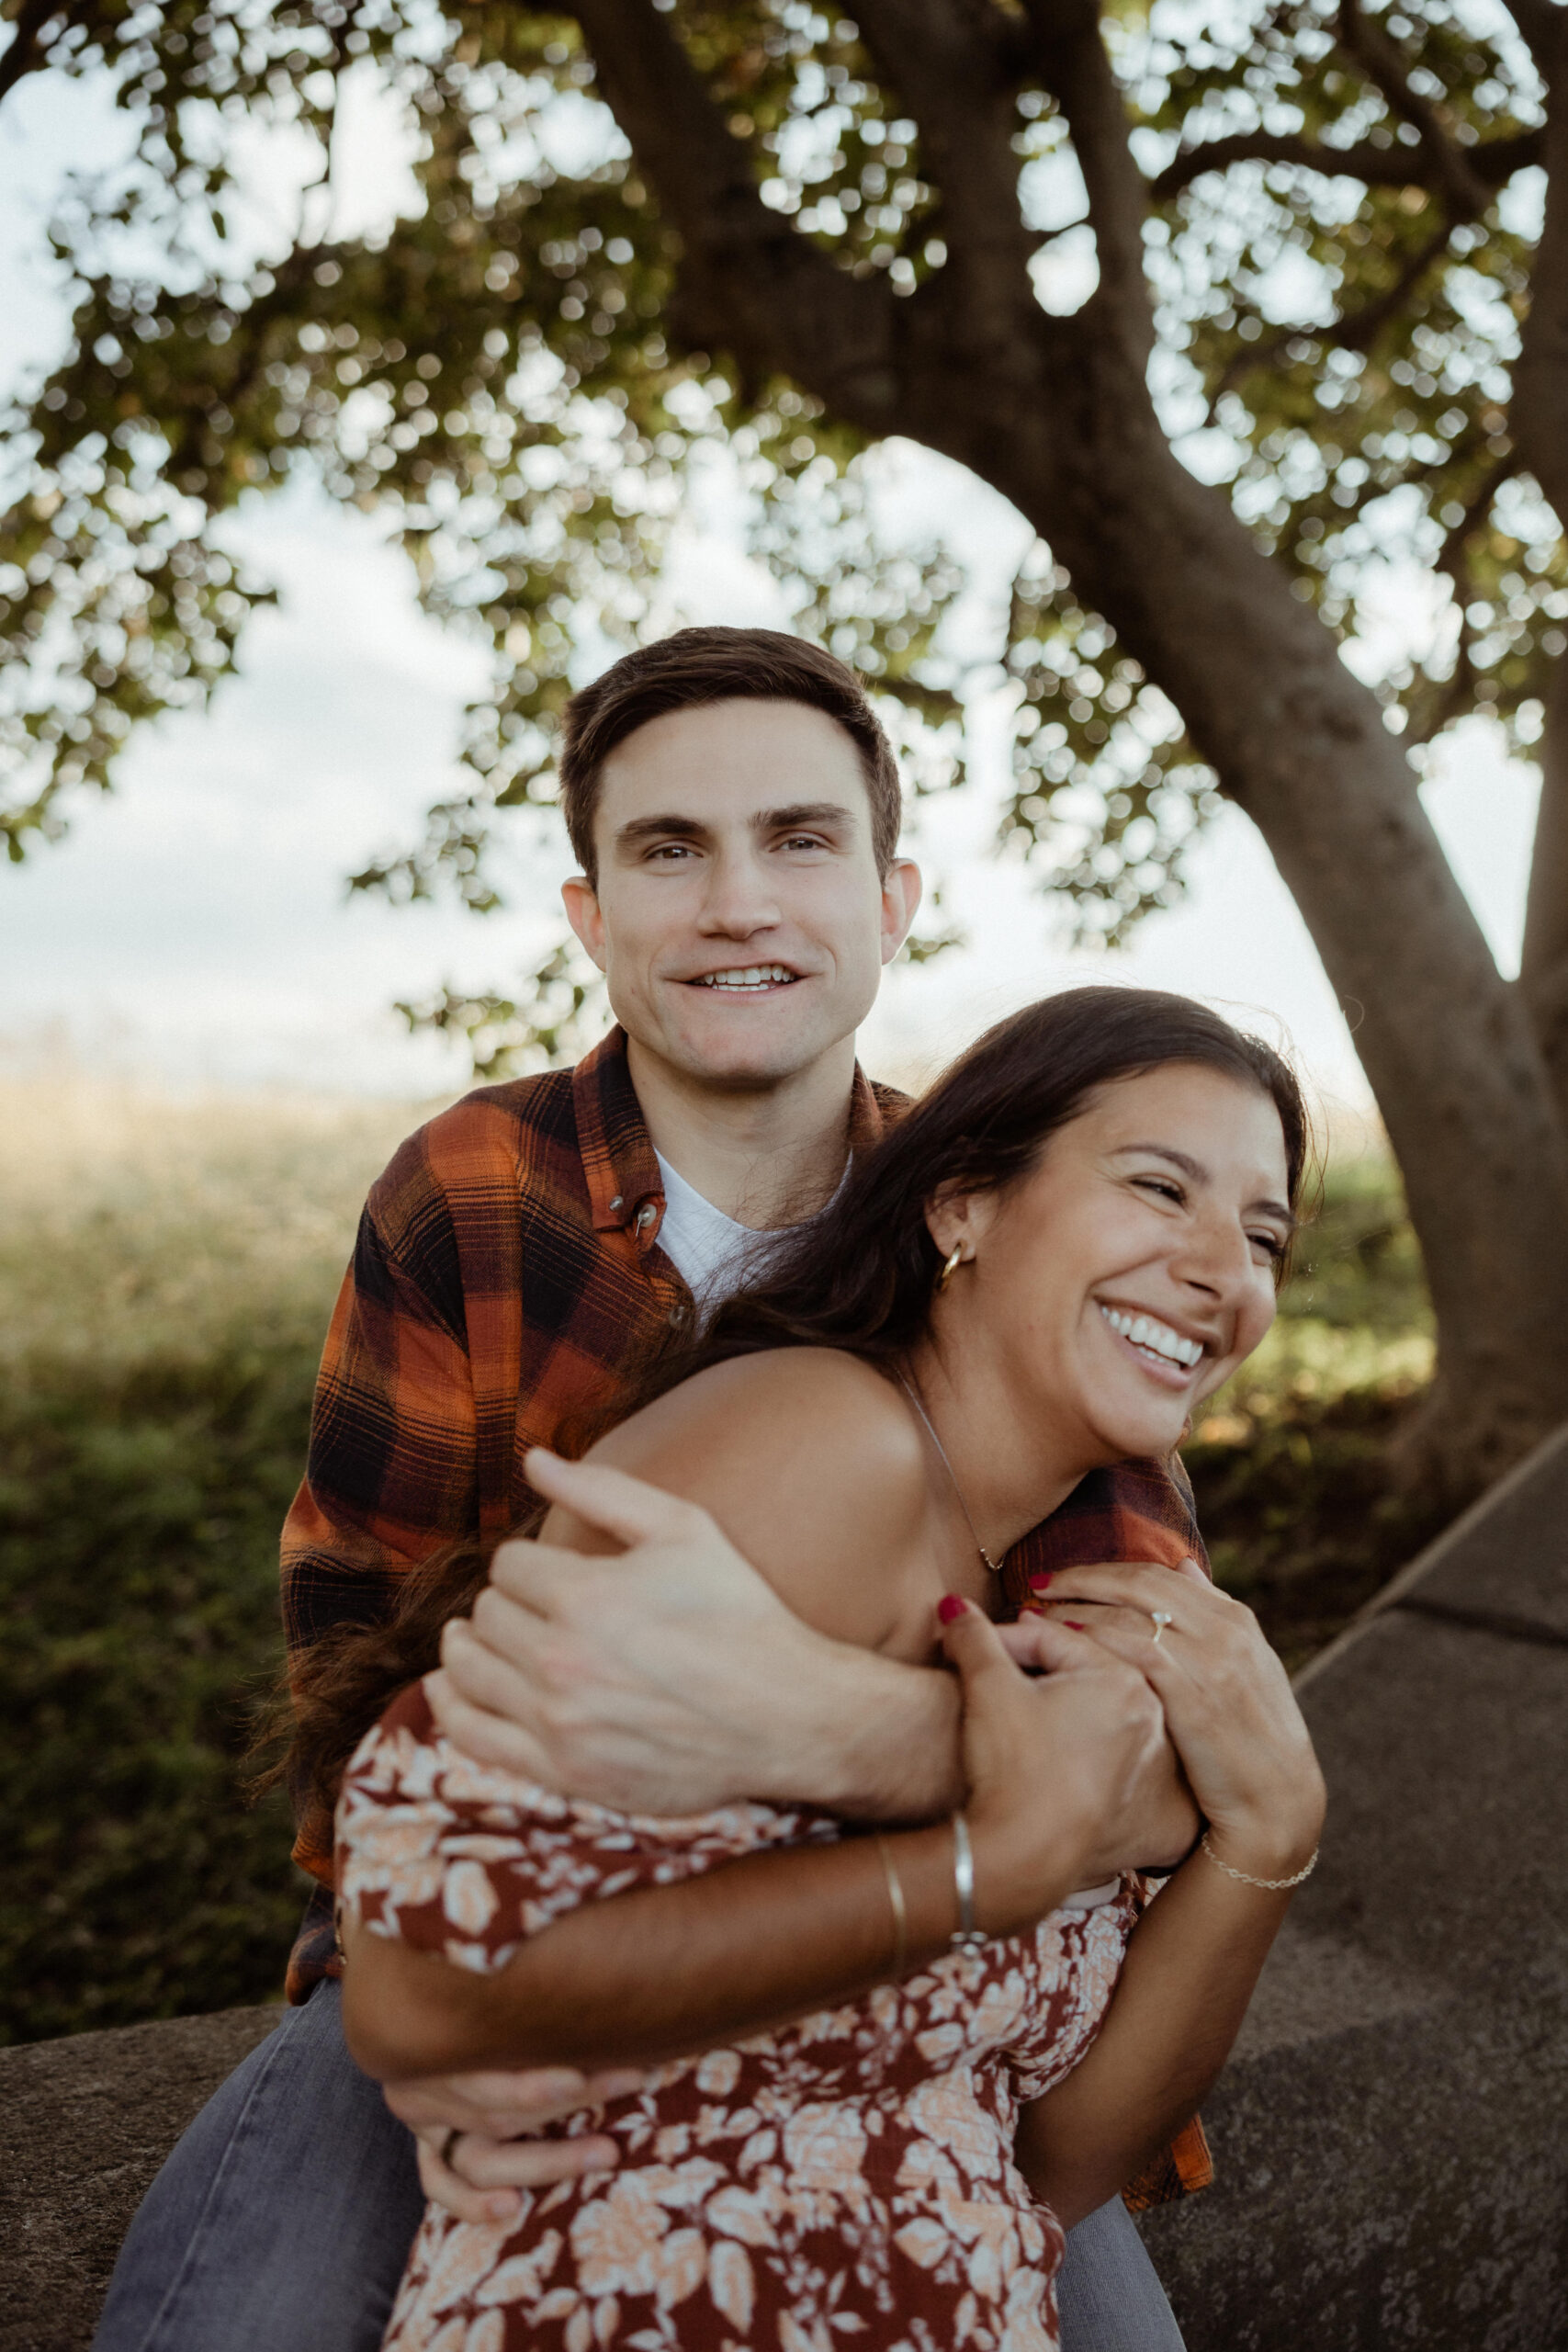 Couple embrace each other in the field during their casual engagement photo shoot